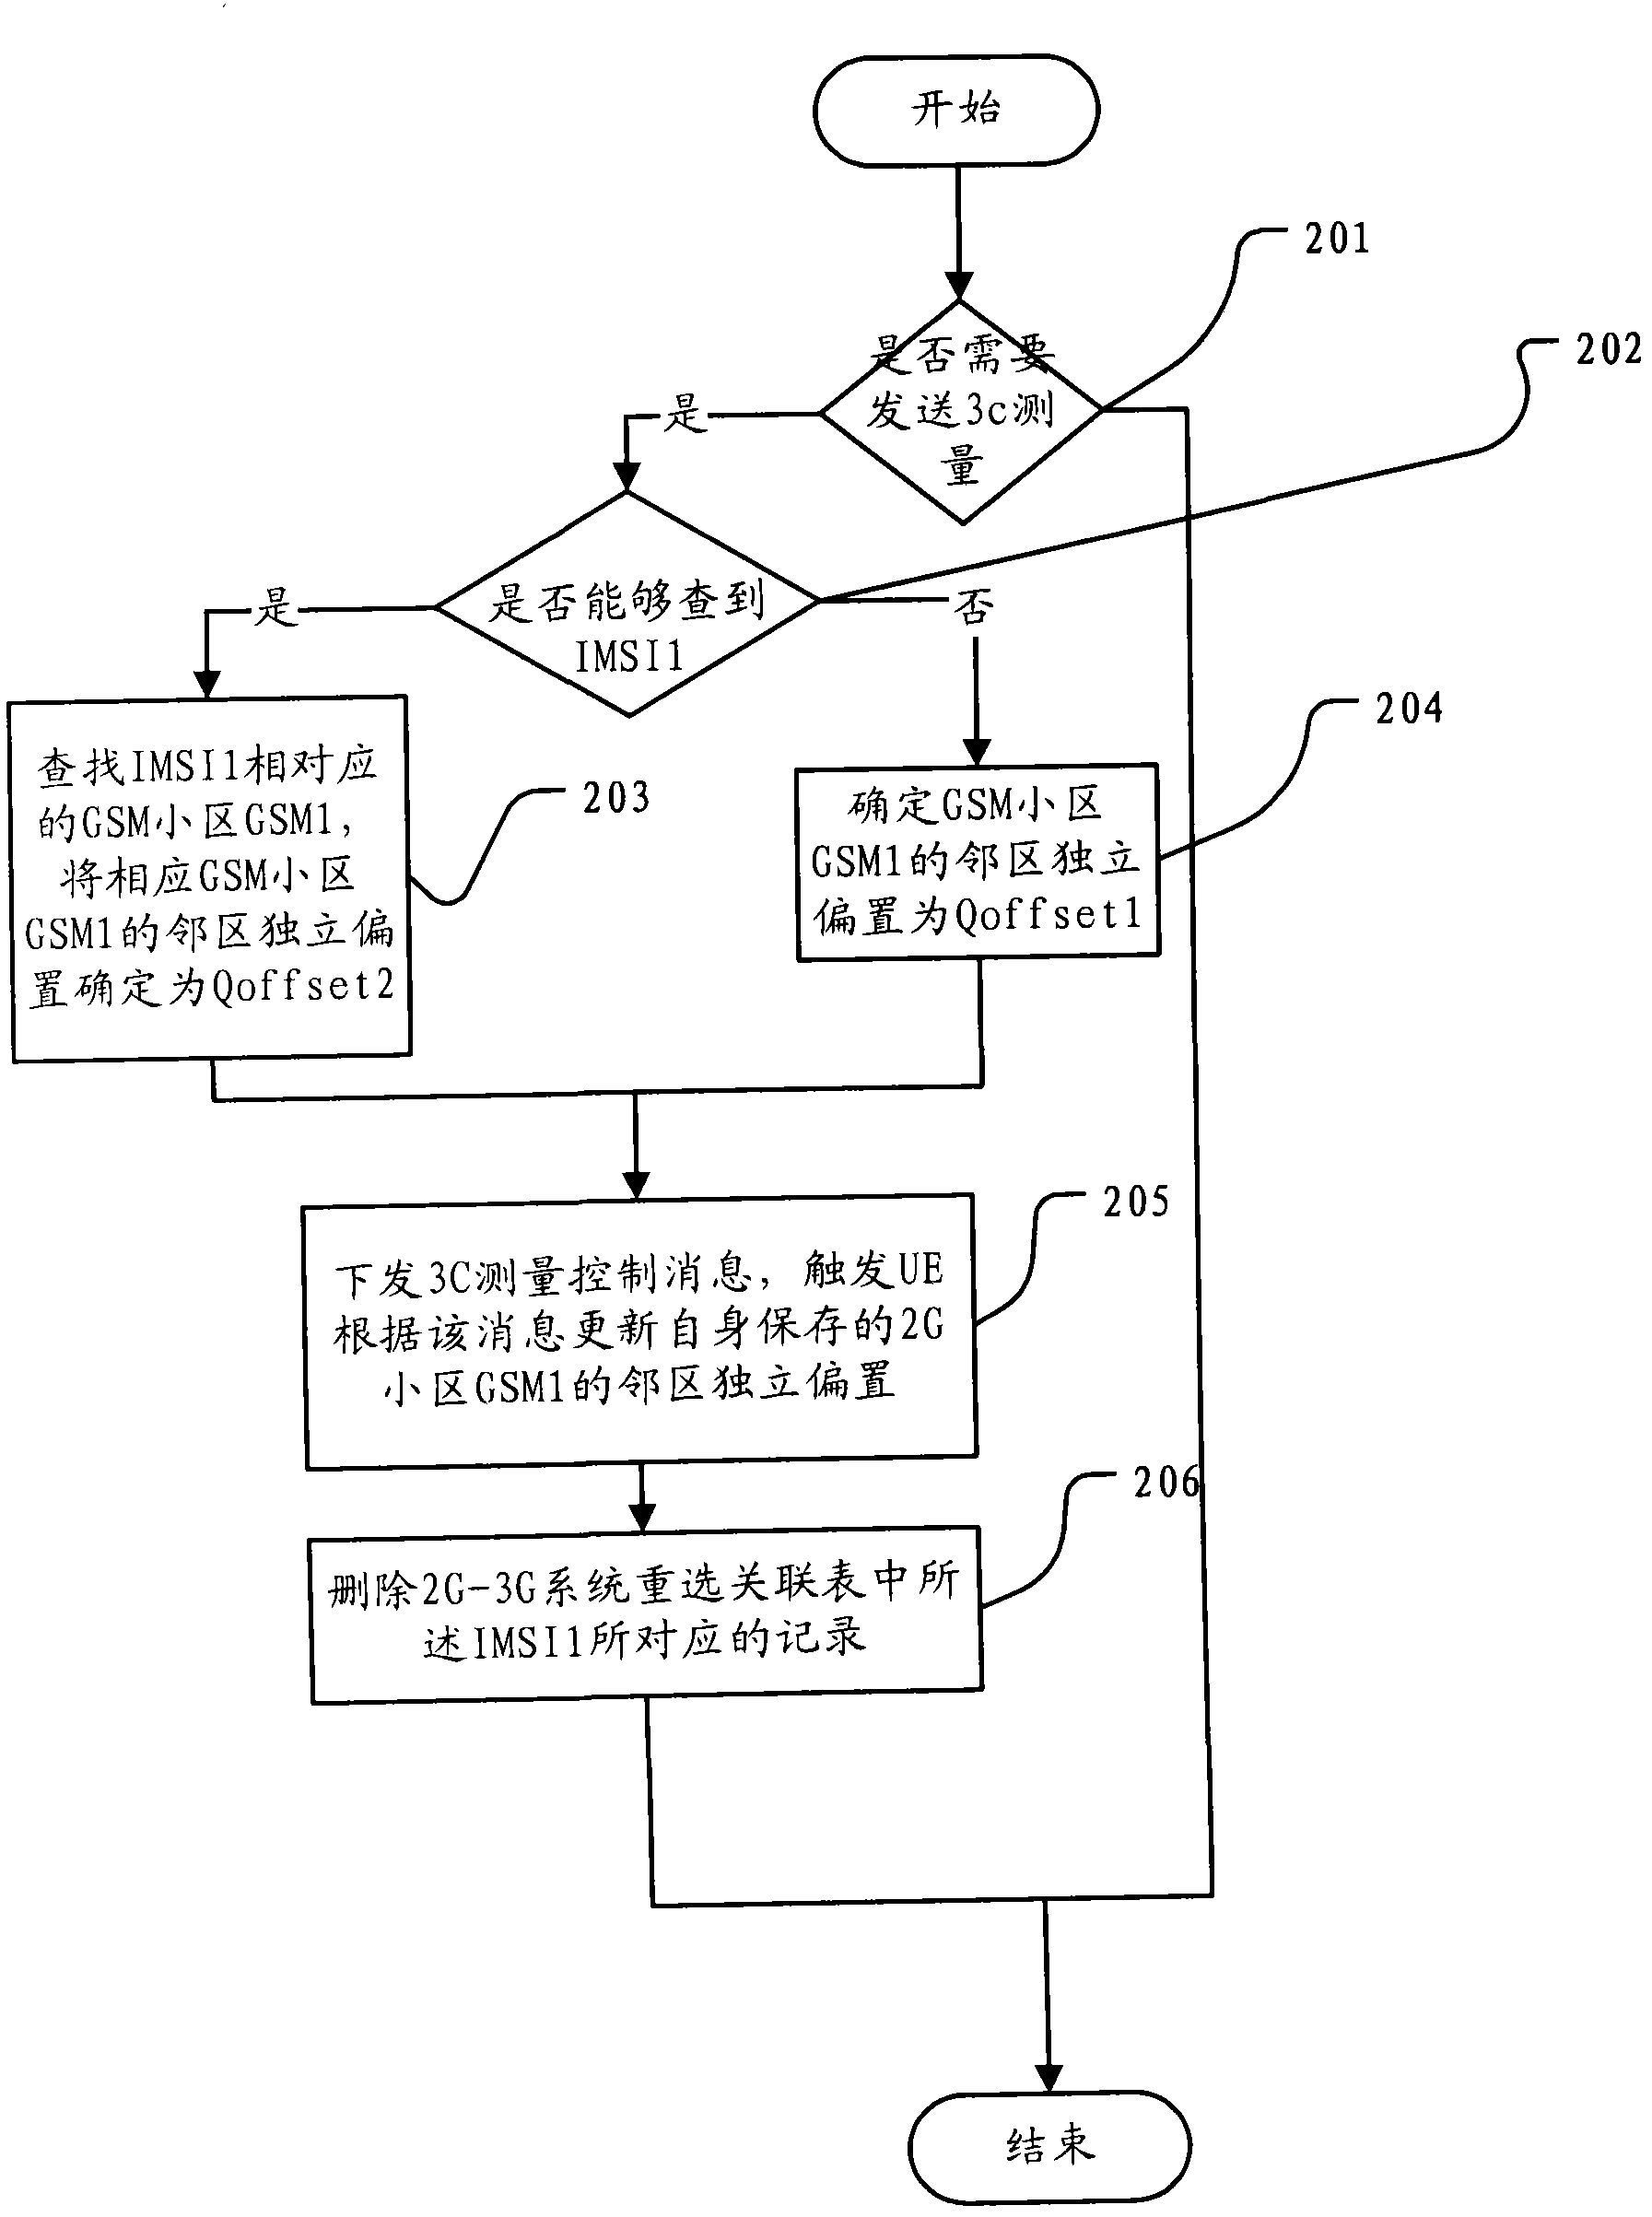 Method for preventing user equipment from crucial cell re-selection between third generation (3G) network and second generation (2G) network